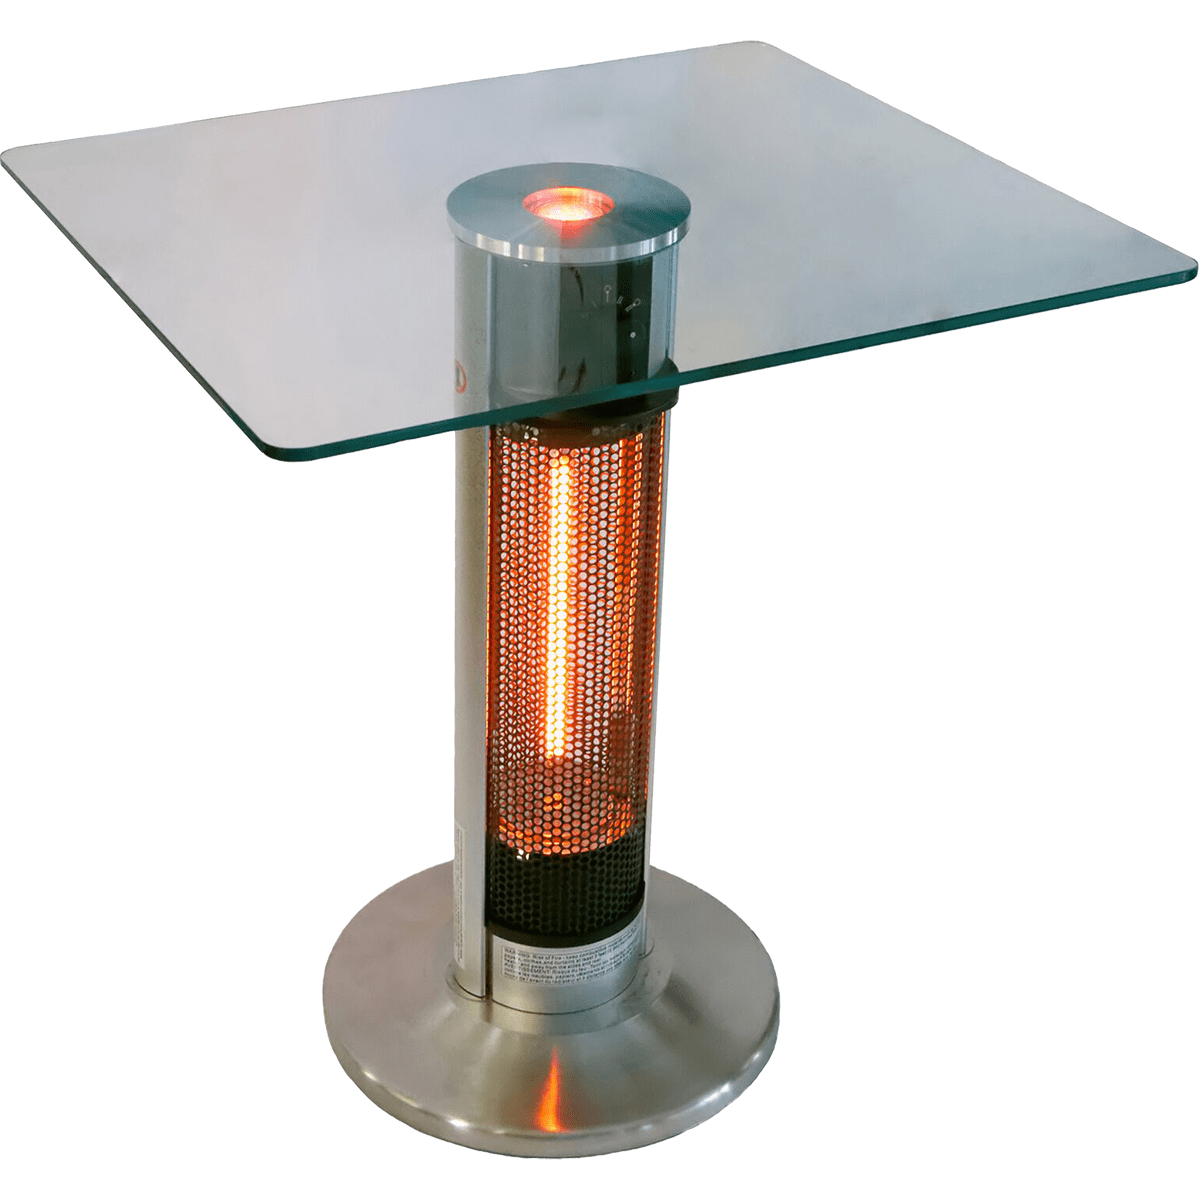 Ener-G+ Square Bistro-Style Infrared Table Heater